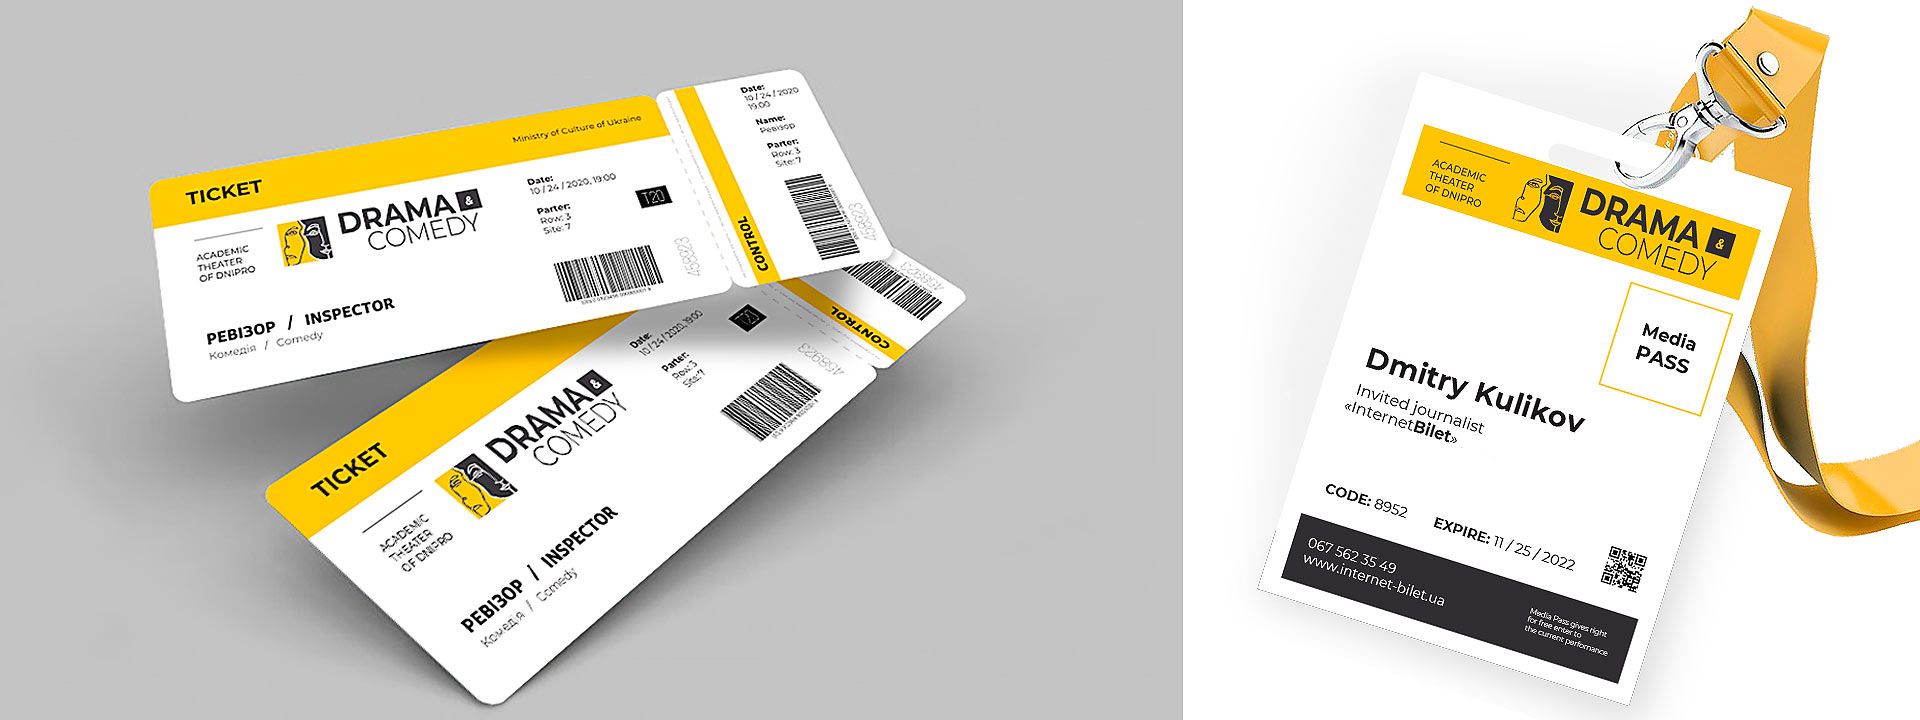 tickets and media pass design